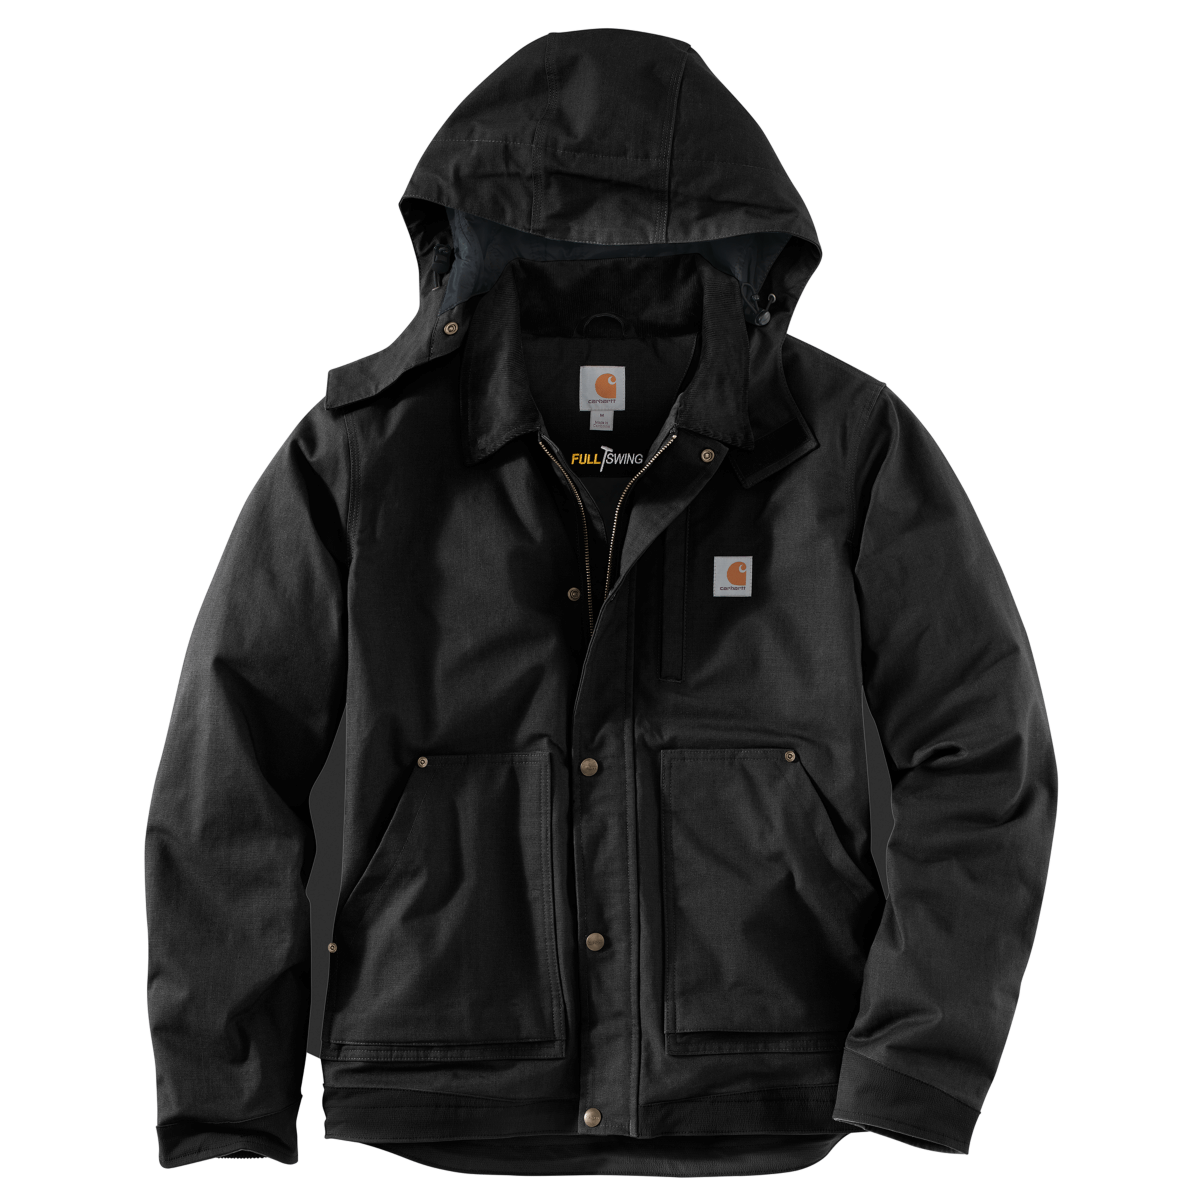 103372 - Carhartt Men's Full Swing Relaxed Fit Ripstop Insulated Jacket